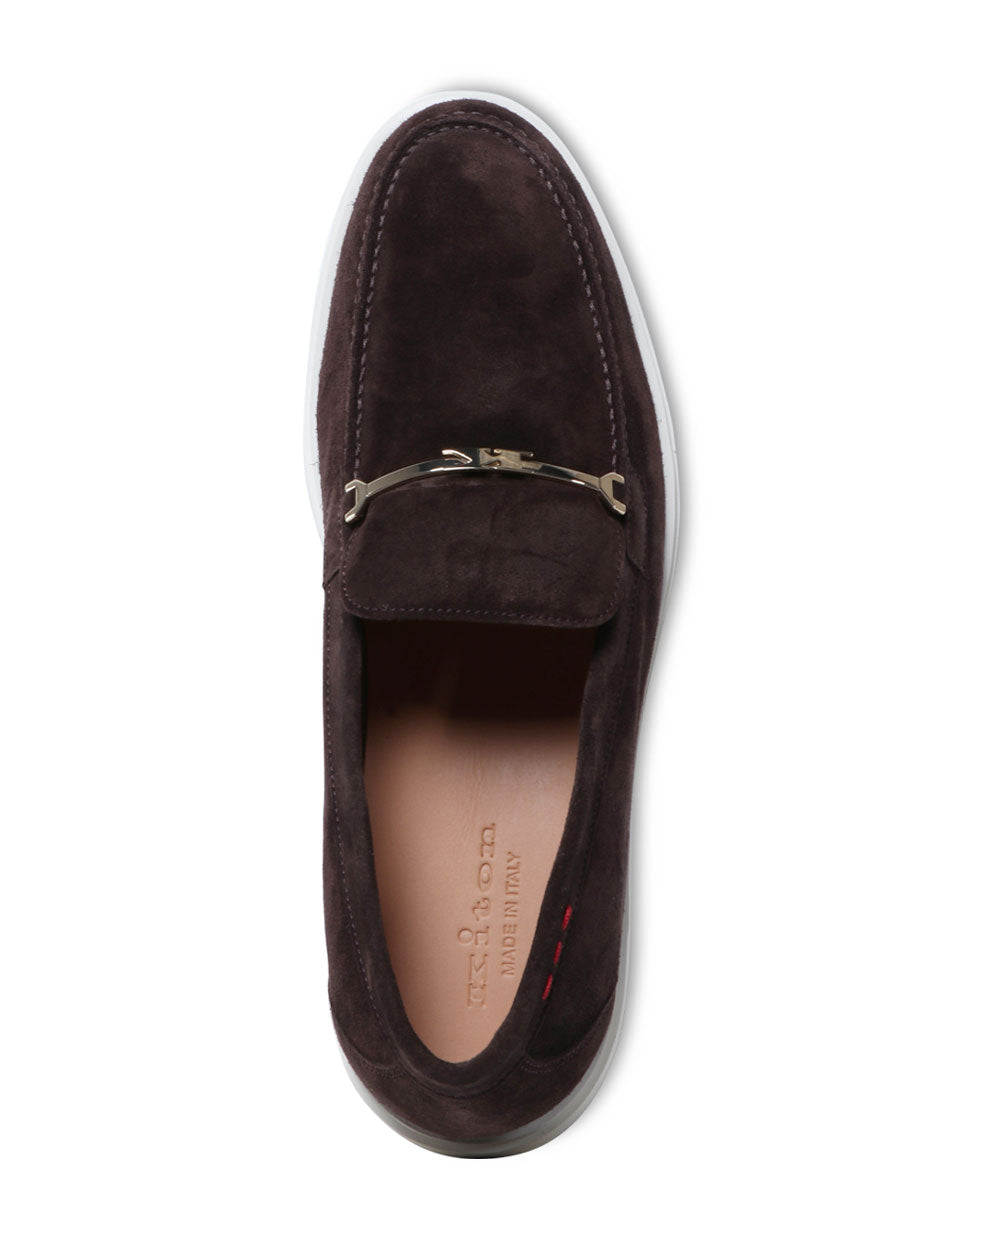 Suede Logo Bit Loafer in Chocolate